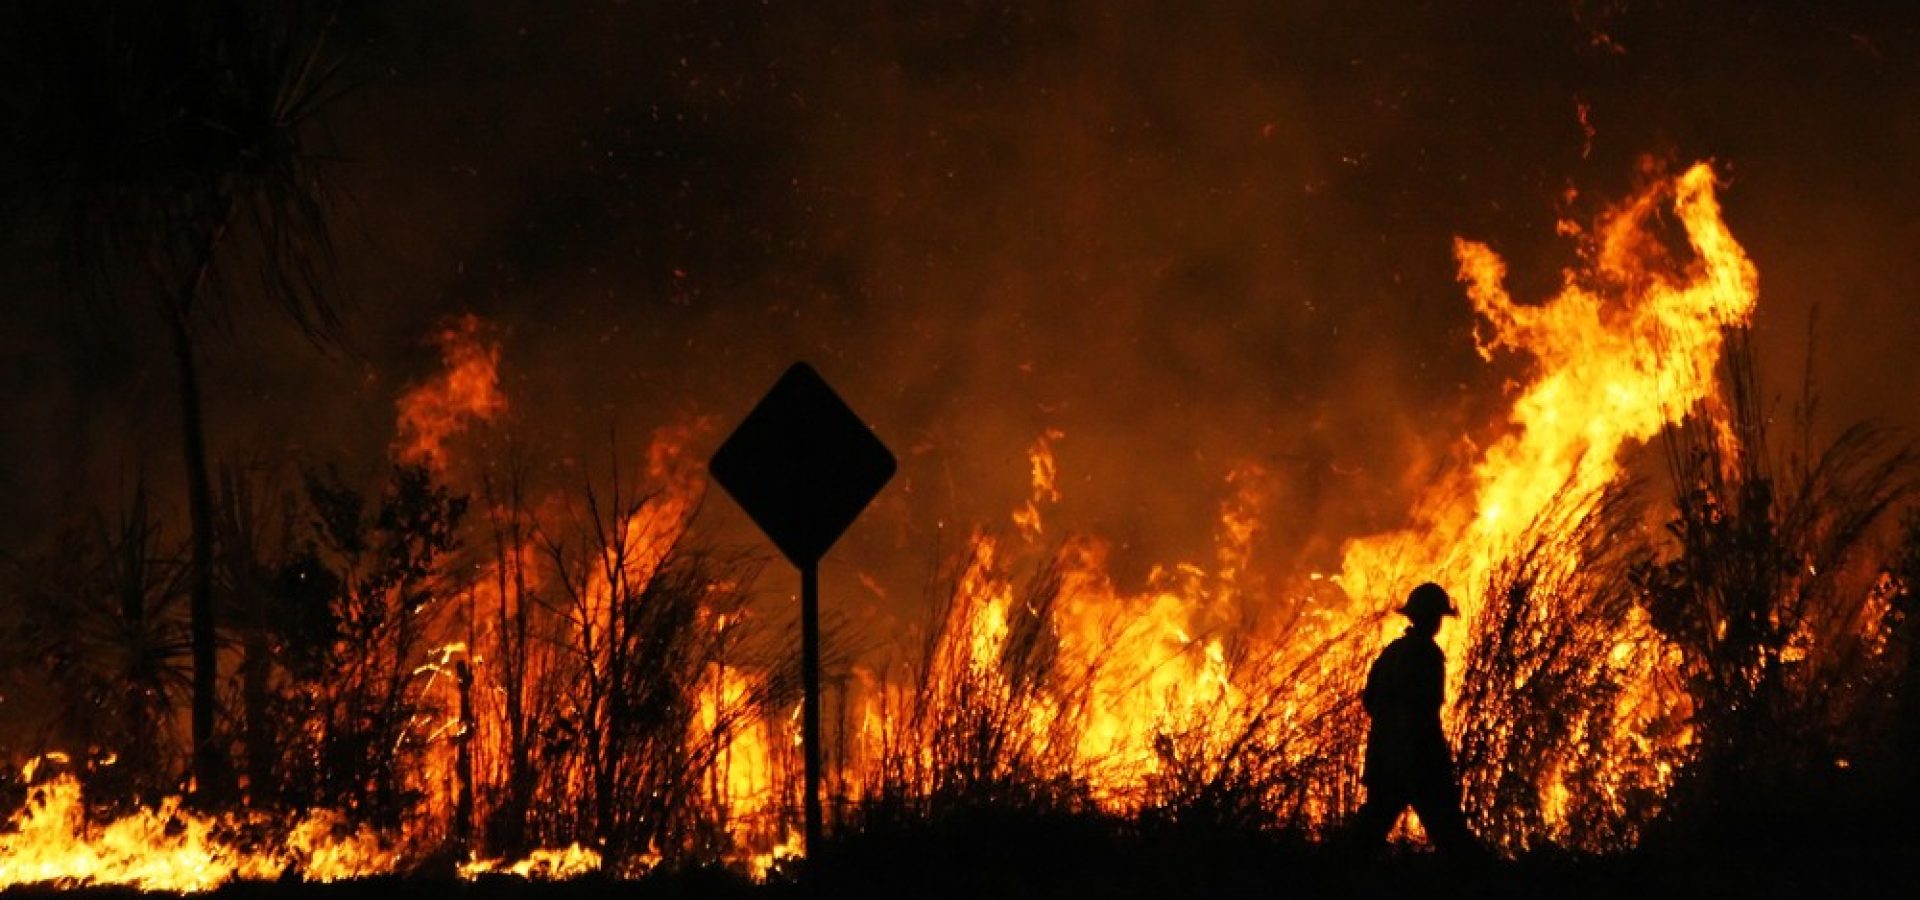 Wibest – Australian Money: A firefighter trying to control a bush fire at night.